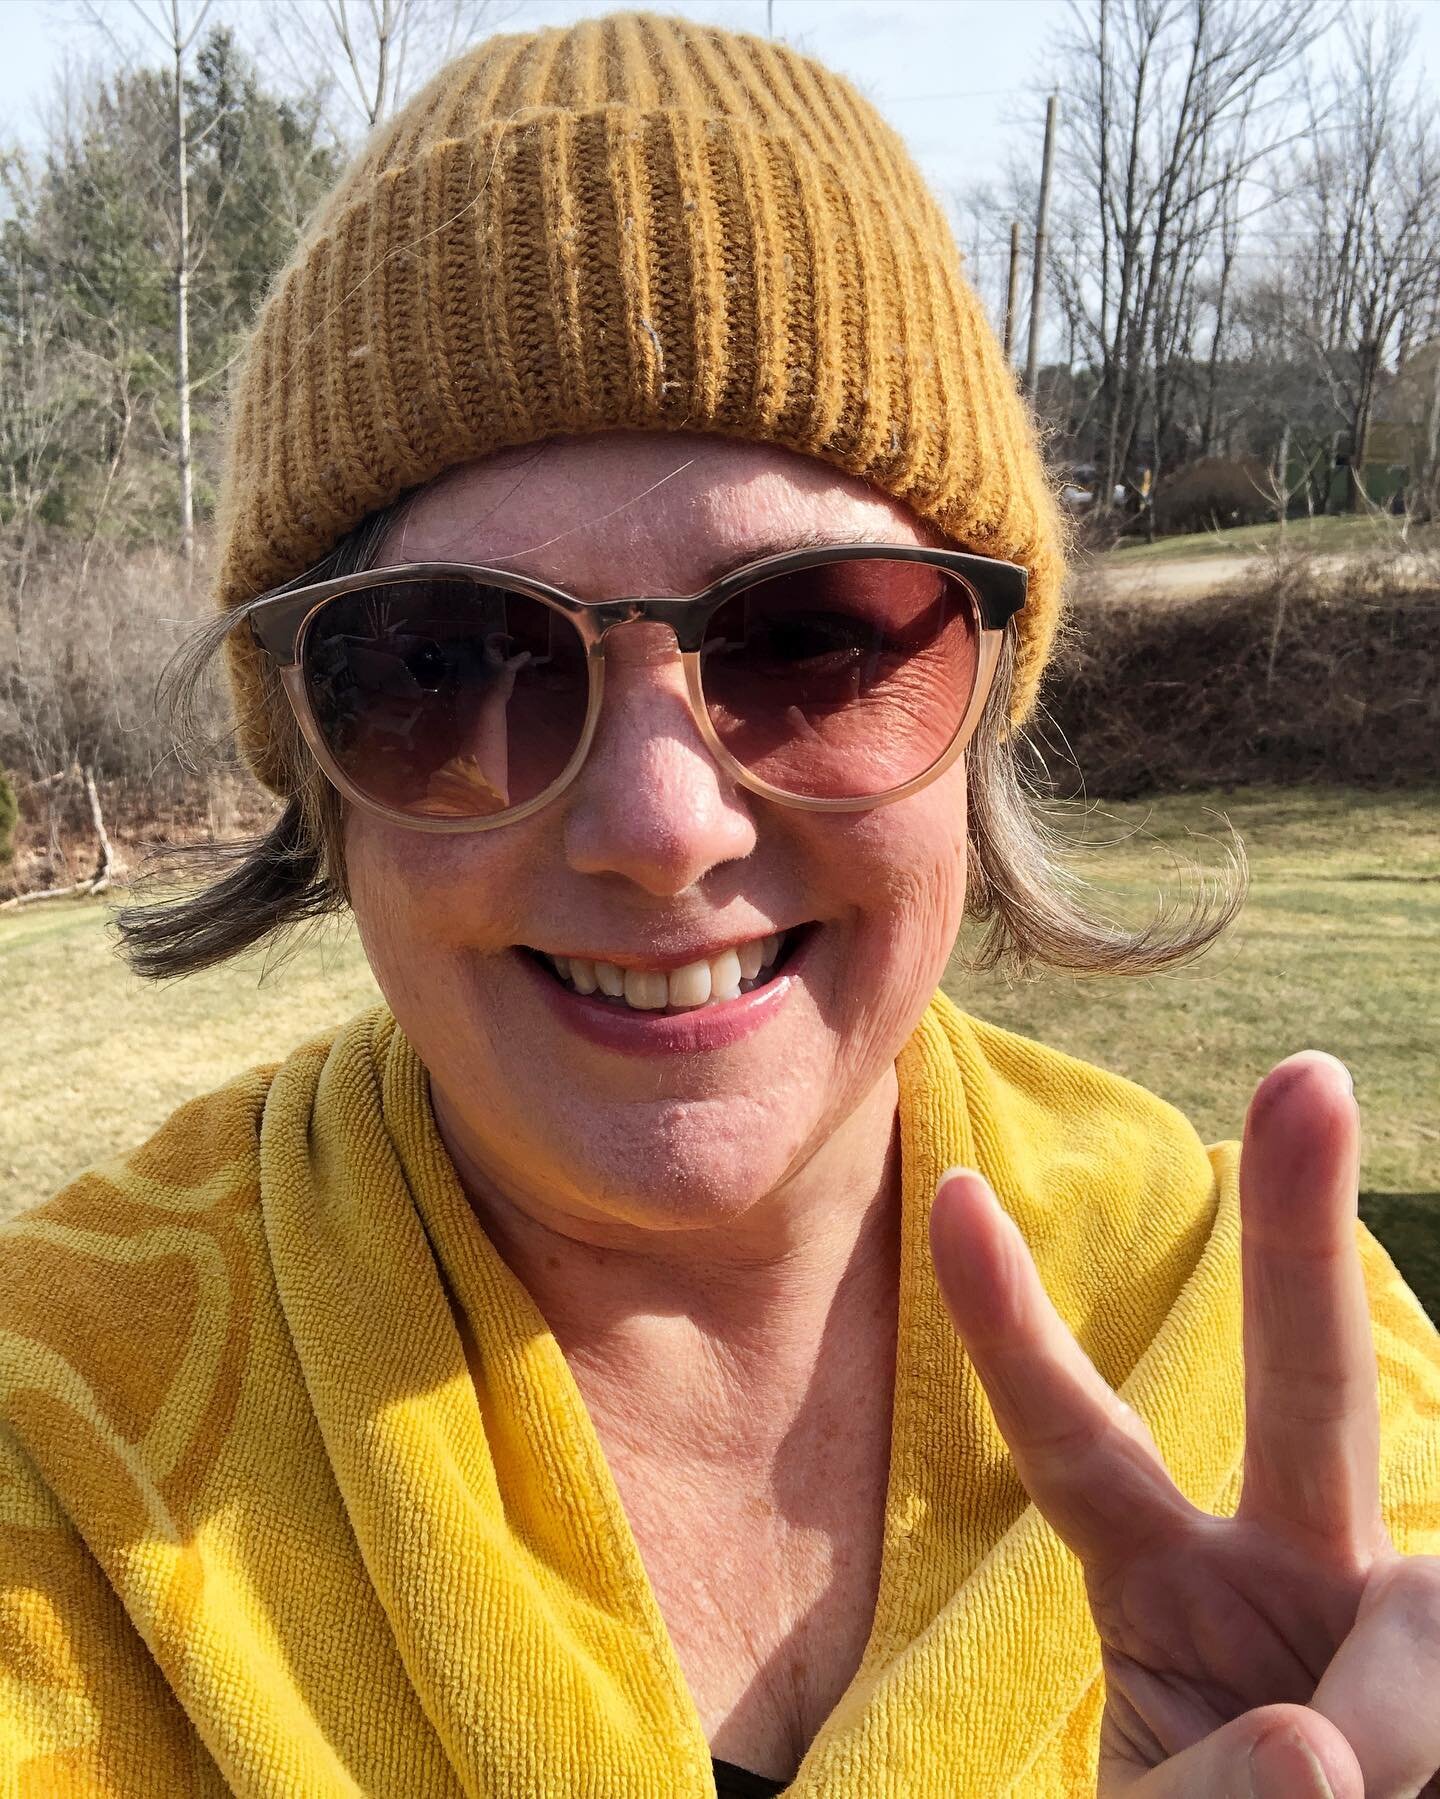 💛💛💛💛Happy to be supporting @finding.our.voices today with my morning dip at Barters Creek in Kittery Point! Met a great group of new dipping friends too! Thanks as always to the amazing Amy Holpkins @dipdowntoriseup and @natalierpavlov for turnin